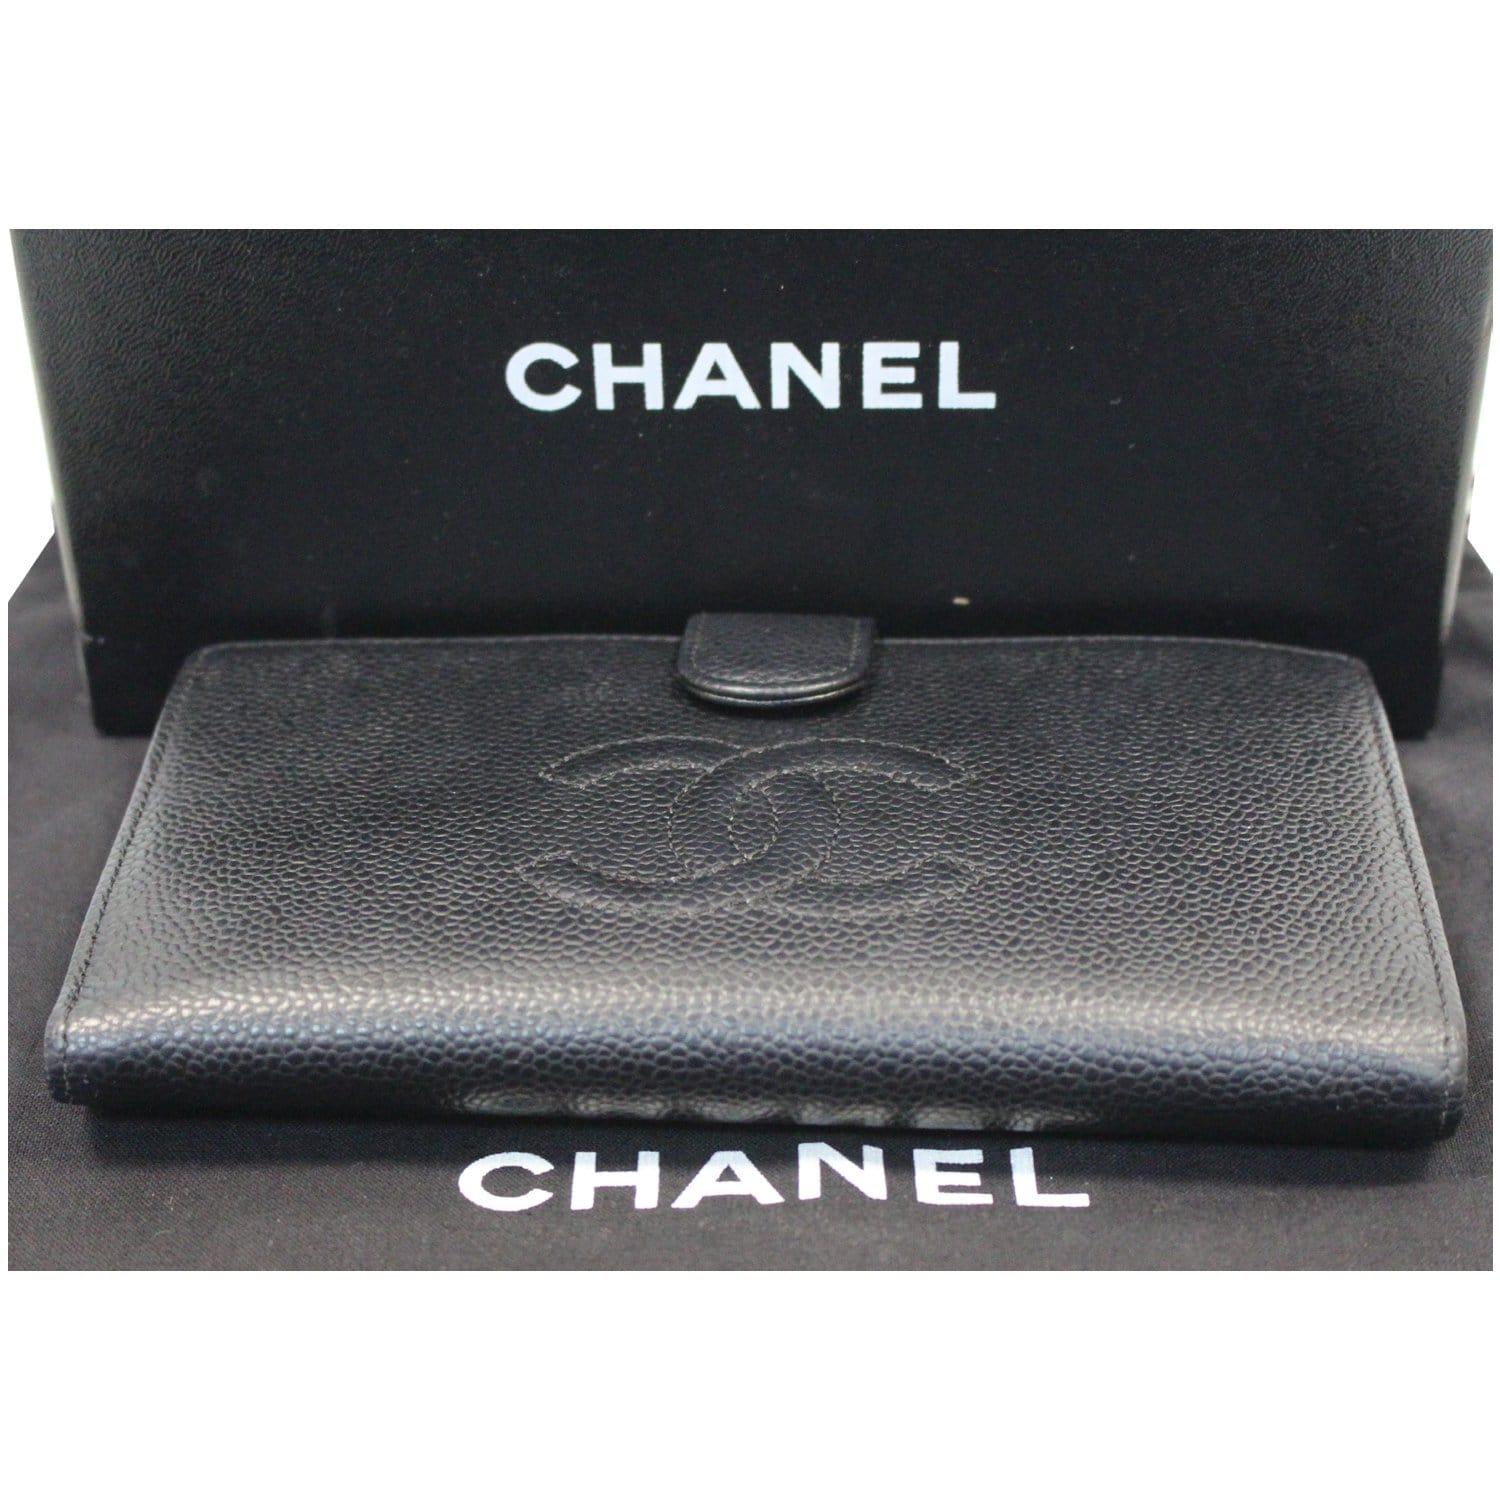 Chanel French Kisslock Caviar Leather Wallet